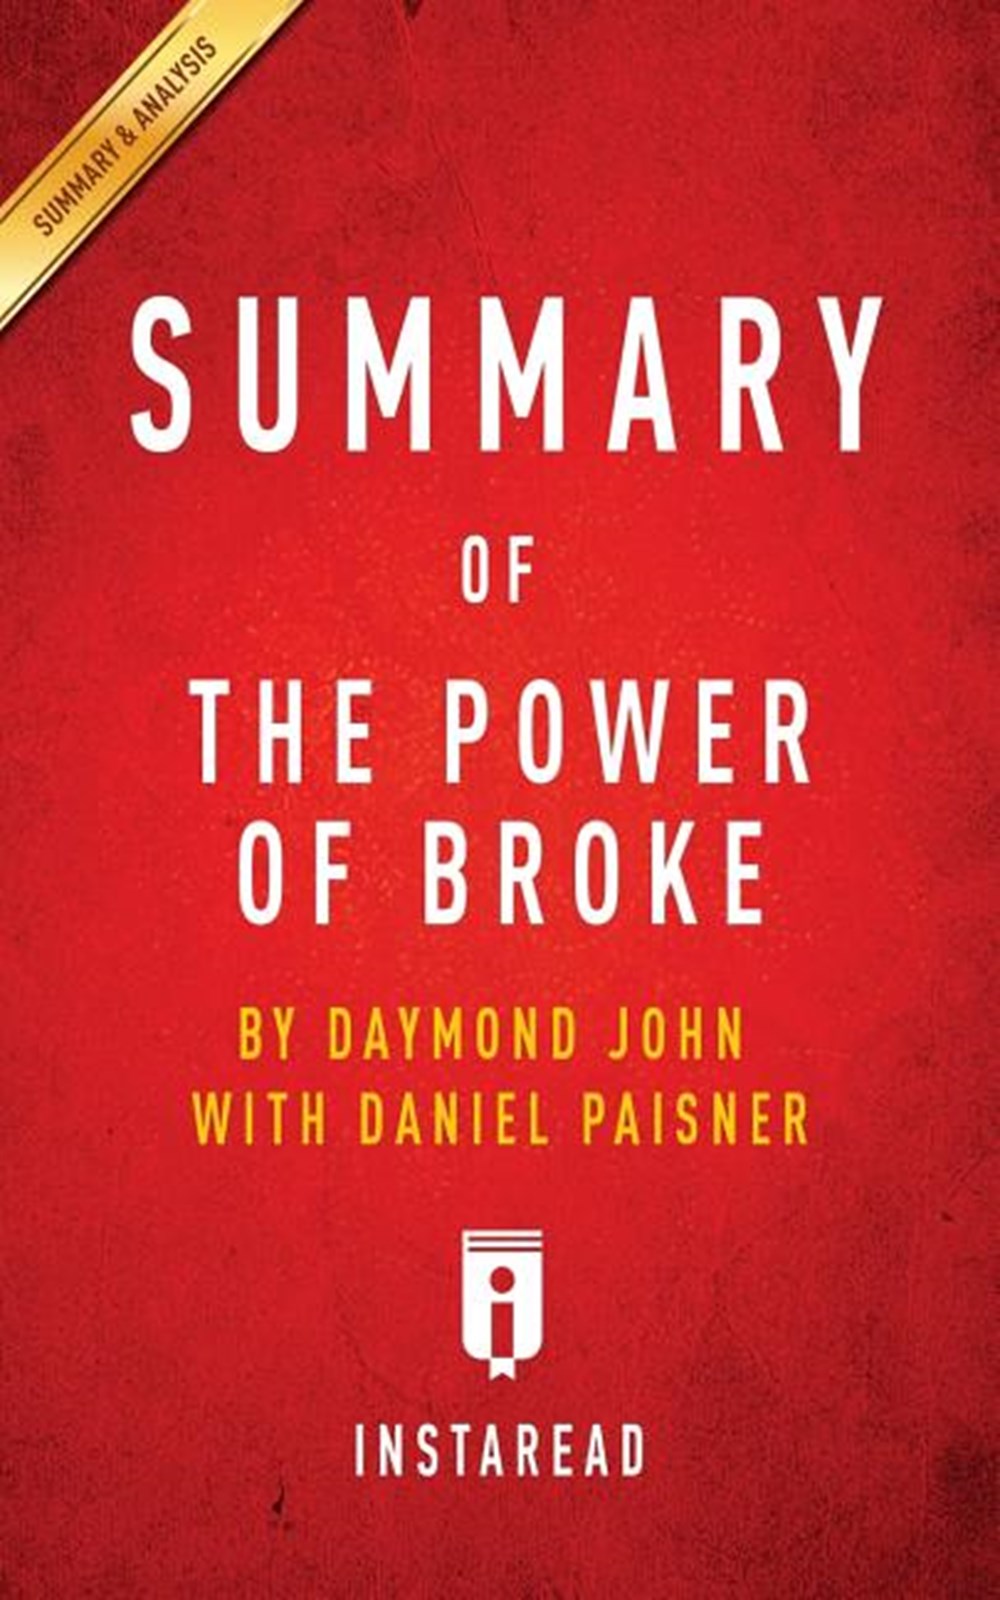 Summary of The Power of Broke by Daymond John with Daniel Paisner - Includes Analysis